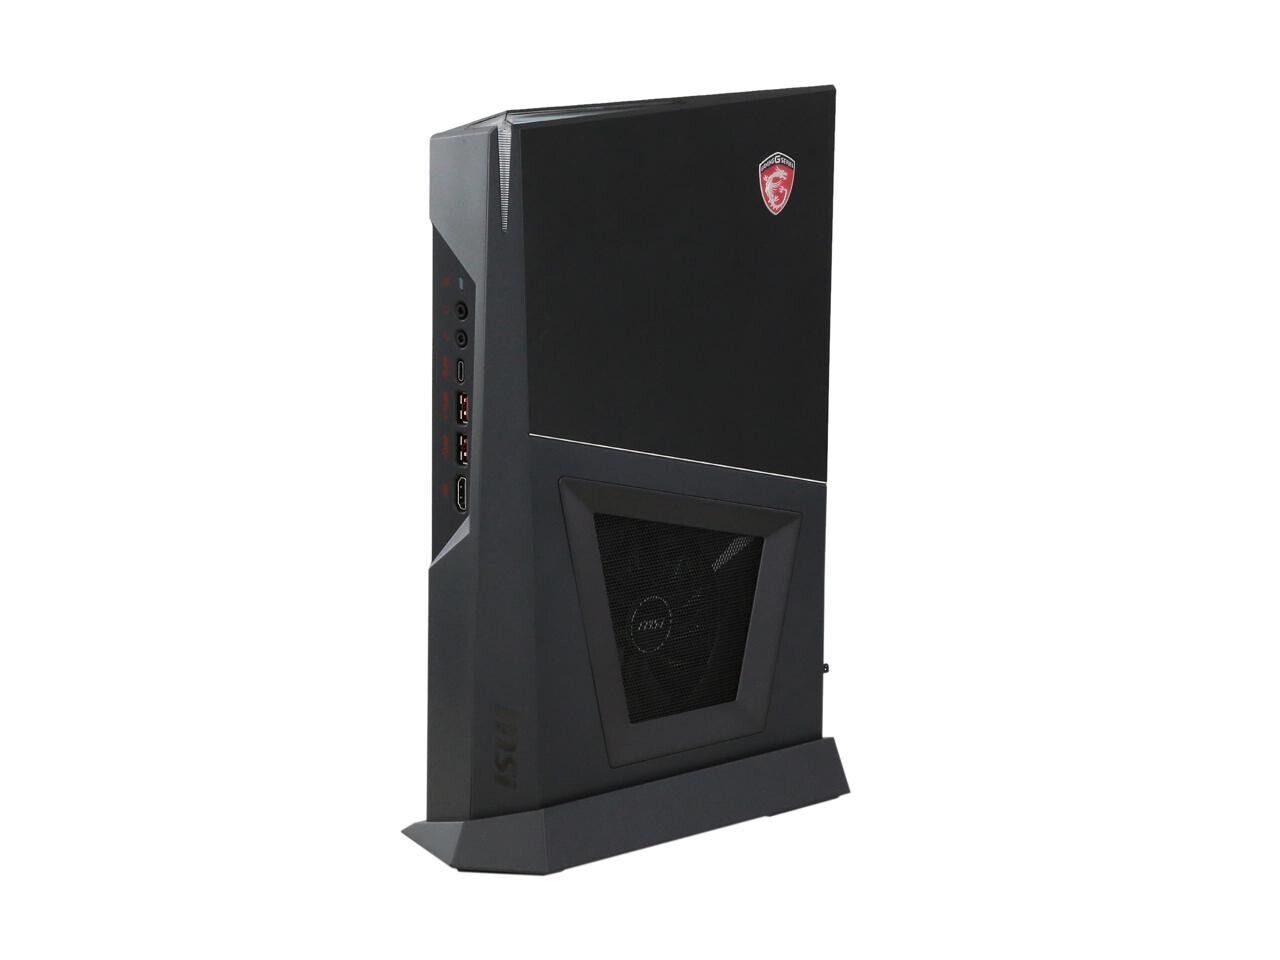 MSI Trident 3 Core i7 8th 8GB 1TB HDD Gaming PC - Trident 3 8RC-004US Reconditioned